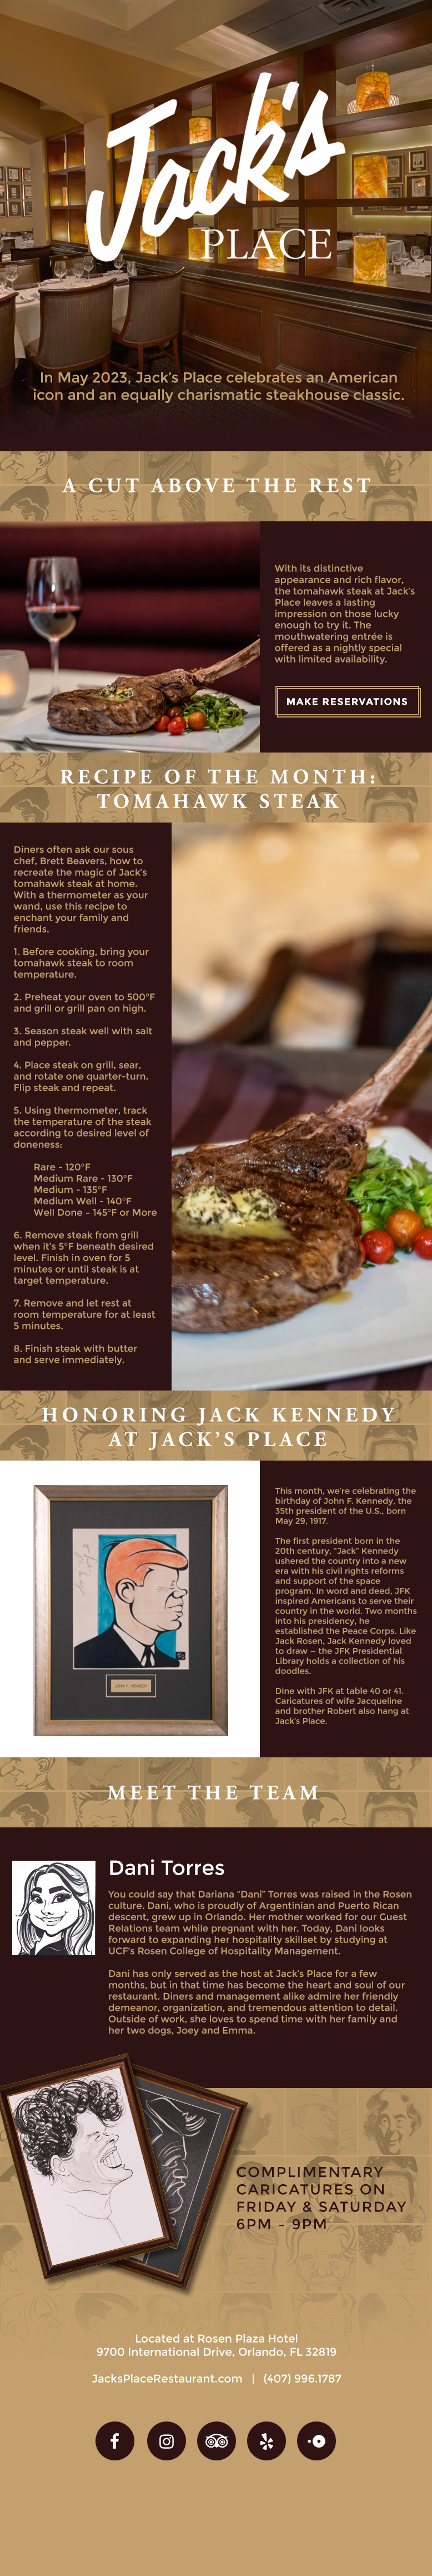 In May 2023, Jack’s Place celebrates an American icon and an equally charismatic steakhouse classic.
		  
A Cut Above the Rest
		  
With its distinctive appearance and rich flavor, the tomahawk steak at Jack’s Place leaves a lasting impression on those lucky enough to try it. The mouthwatering entrée is offered as a nightly special with limited availability.
		  
Recipe of the Month: Tomahawk Steak
		  
Diners often ask our sous chef, Brett Beavers, how to recreate the magic of Jack’s tomahawk steak at home. With a thermometer as your wand, use this recipe to enchant your family and friends.  

1. Before cooking, bring your tomahawk steak to room temperature.  

2. Preheat your oven to 500°F and grill or grill pan on high. 

3. Season steak well with salt and pepper.  

4. Place steak on grill, sear, and rotate one quarter-turn. Flip steak and repeat.  

5. Using thermometer, track the temperature of the steak according to desired level of doneness: 

	Rare - 120°F 
	Medium Rare - 130°F 
	Medium - 135°F 
	Medium Well - 140°F 
	Well Done – 145°F or More 

6. Remove steak from grill when it’s 5°F beneath desired level. Finish in oven for 5 minutes or until steak is at target temperature.  

7. Remove and let rest at room temperature for at least 5 minutes.  

8. Finish steak with butter and serve immediately.

Honoring Jack Kennedy at Jack’s Place 

This month, we’re celebrating the birthday of John F. Kennedy, the 35th president of the U.S., born May 29, 1917.  

The first president born in the 20th century, “Jack” Kennedy ushered the country into a new era with his civil rights reforms and support of the space program. In word and deed, JFK inspired Americans to serve their country in the world. Two months into his presidency, he established the Peace Corps. Like Jack Rosen, Jack Kennedy loved to draw — the JFK Presidential Library holds a collection of his doodles.  

Dine with JFK at table 40 or 41. Caricatures of wife Jacqueline and brother Robert also hang at Jack’s Place.
		  
Meet The Team
		  
Dani Torres

You could say that Dariana “Dani” Torres was raised in the Rosen culture. Dani, who is proudly of Argentinian and Puerto Rican descent, grew up in Orlando. Her mother worked for our Guest Relations team while pregnant with her. Today, Dani looks forward to expanding her hospitality skillset by studying at UCF’s Rosen College of Hospitality Management. 

Dani has only served as the host at Jack’s Place for a few months, but in that time has become the heart and soul of our restaurant. Diners and management alike admire her friendly demeanor, organization, and tremendous attention to detail. Outside of work, she loves to spend time with her family and her two dogs, Joey and Emma. 